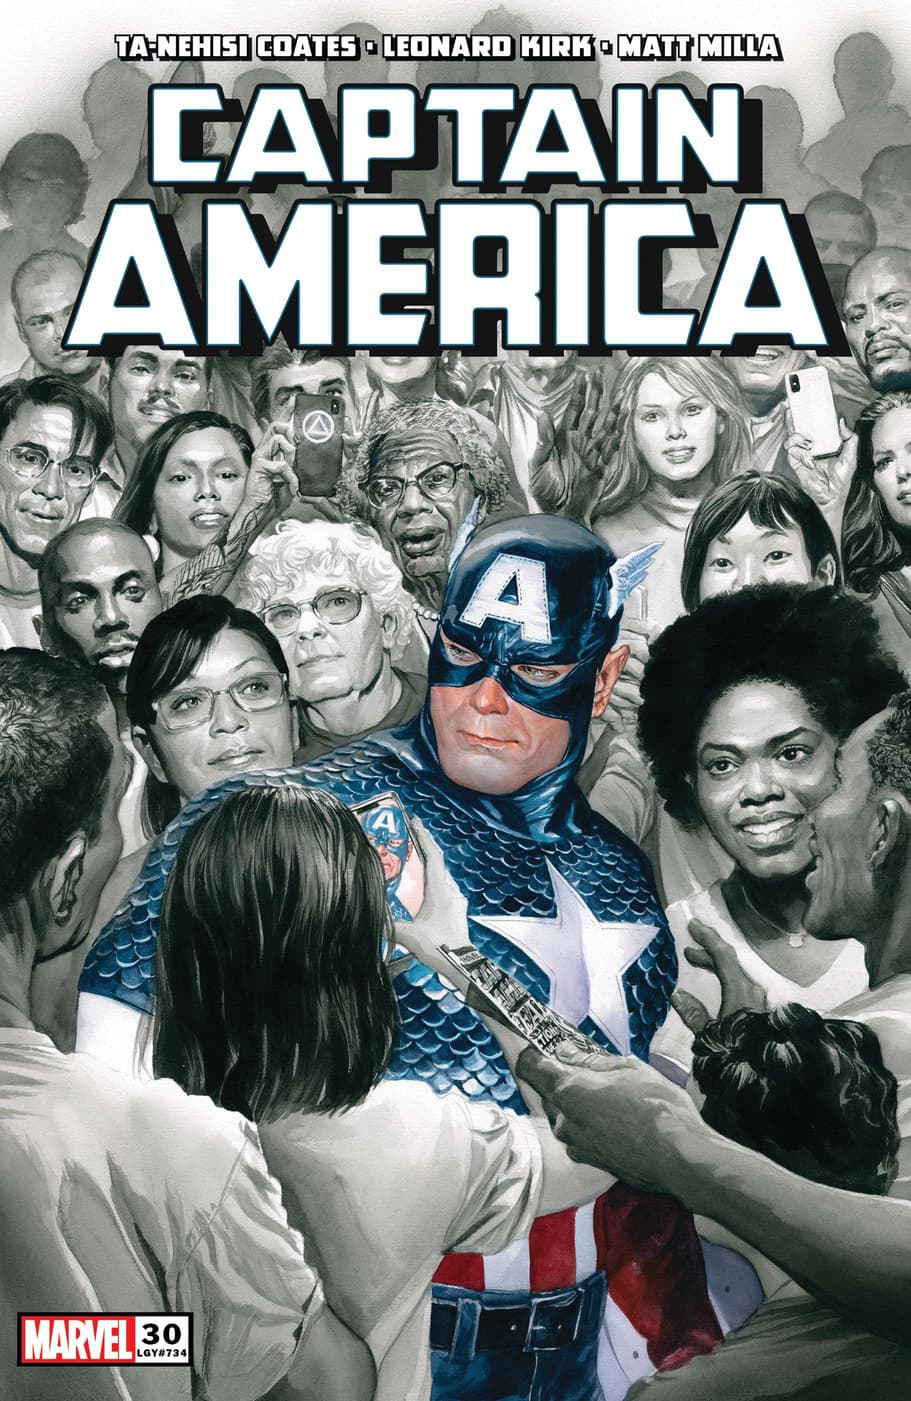 CAPTAIN AMERICA #30 cover by Alex Ross